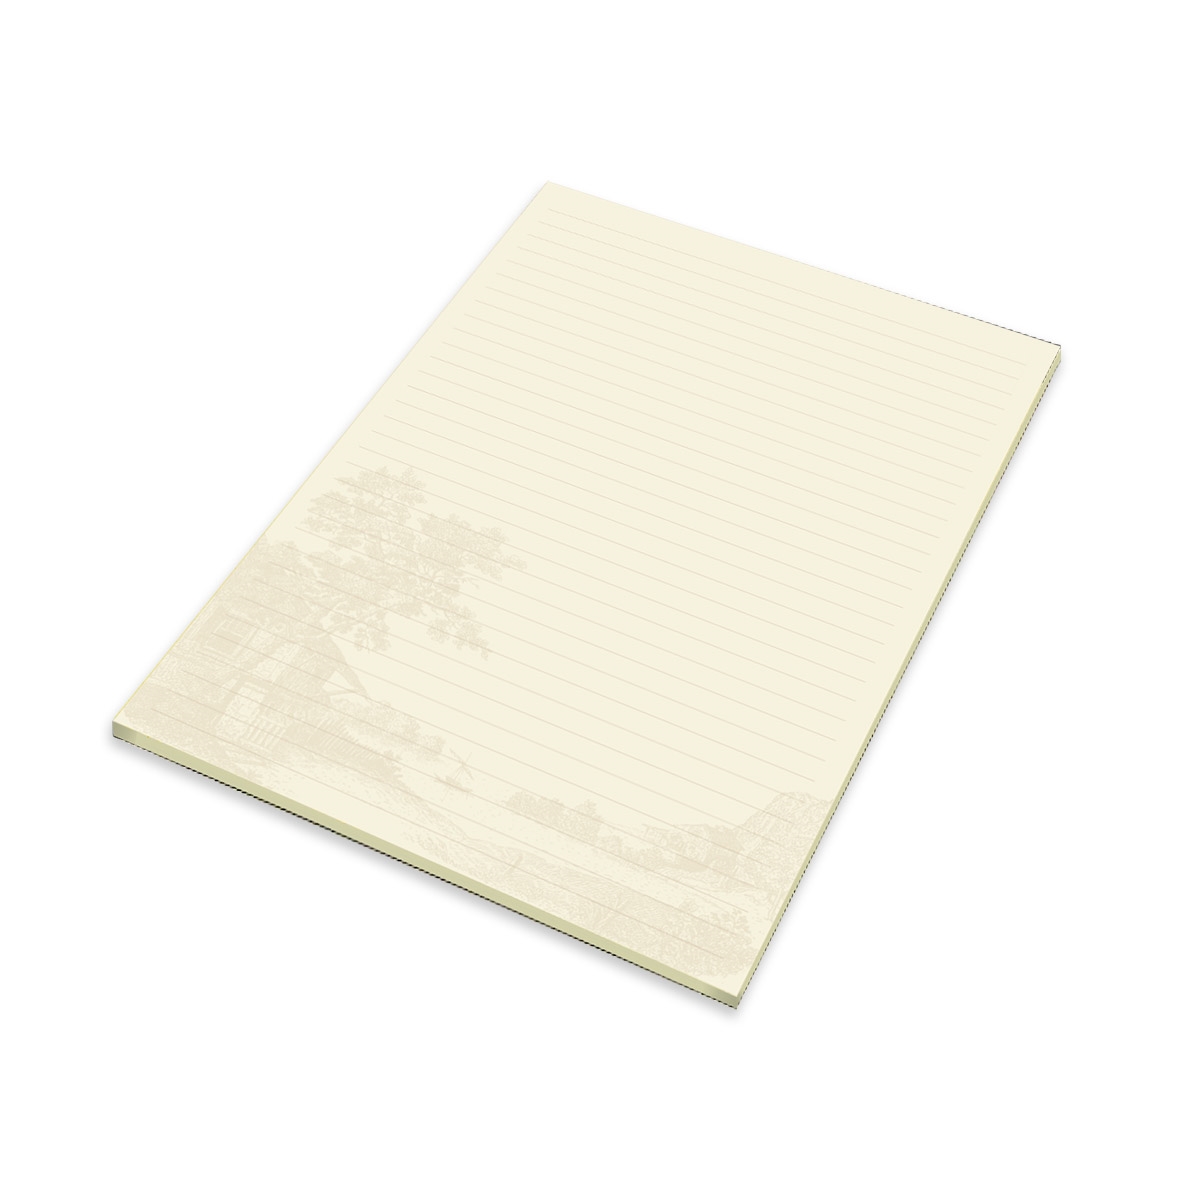  JW Letter Writing A4 Pad Stationery Paper Lined Gift